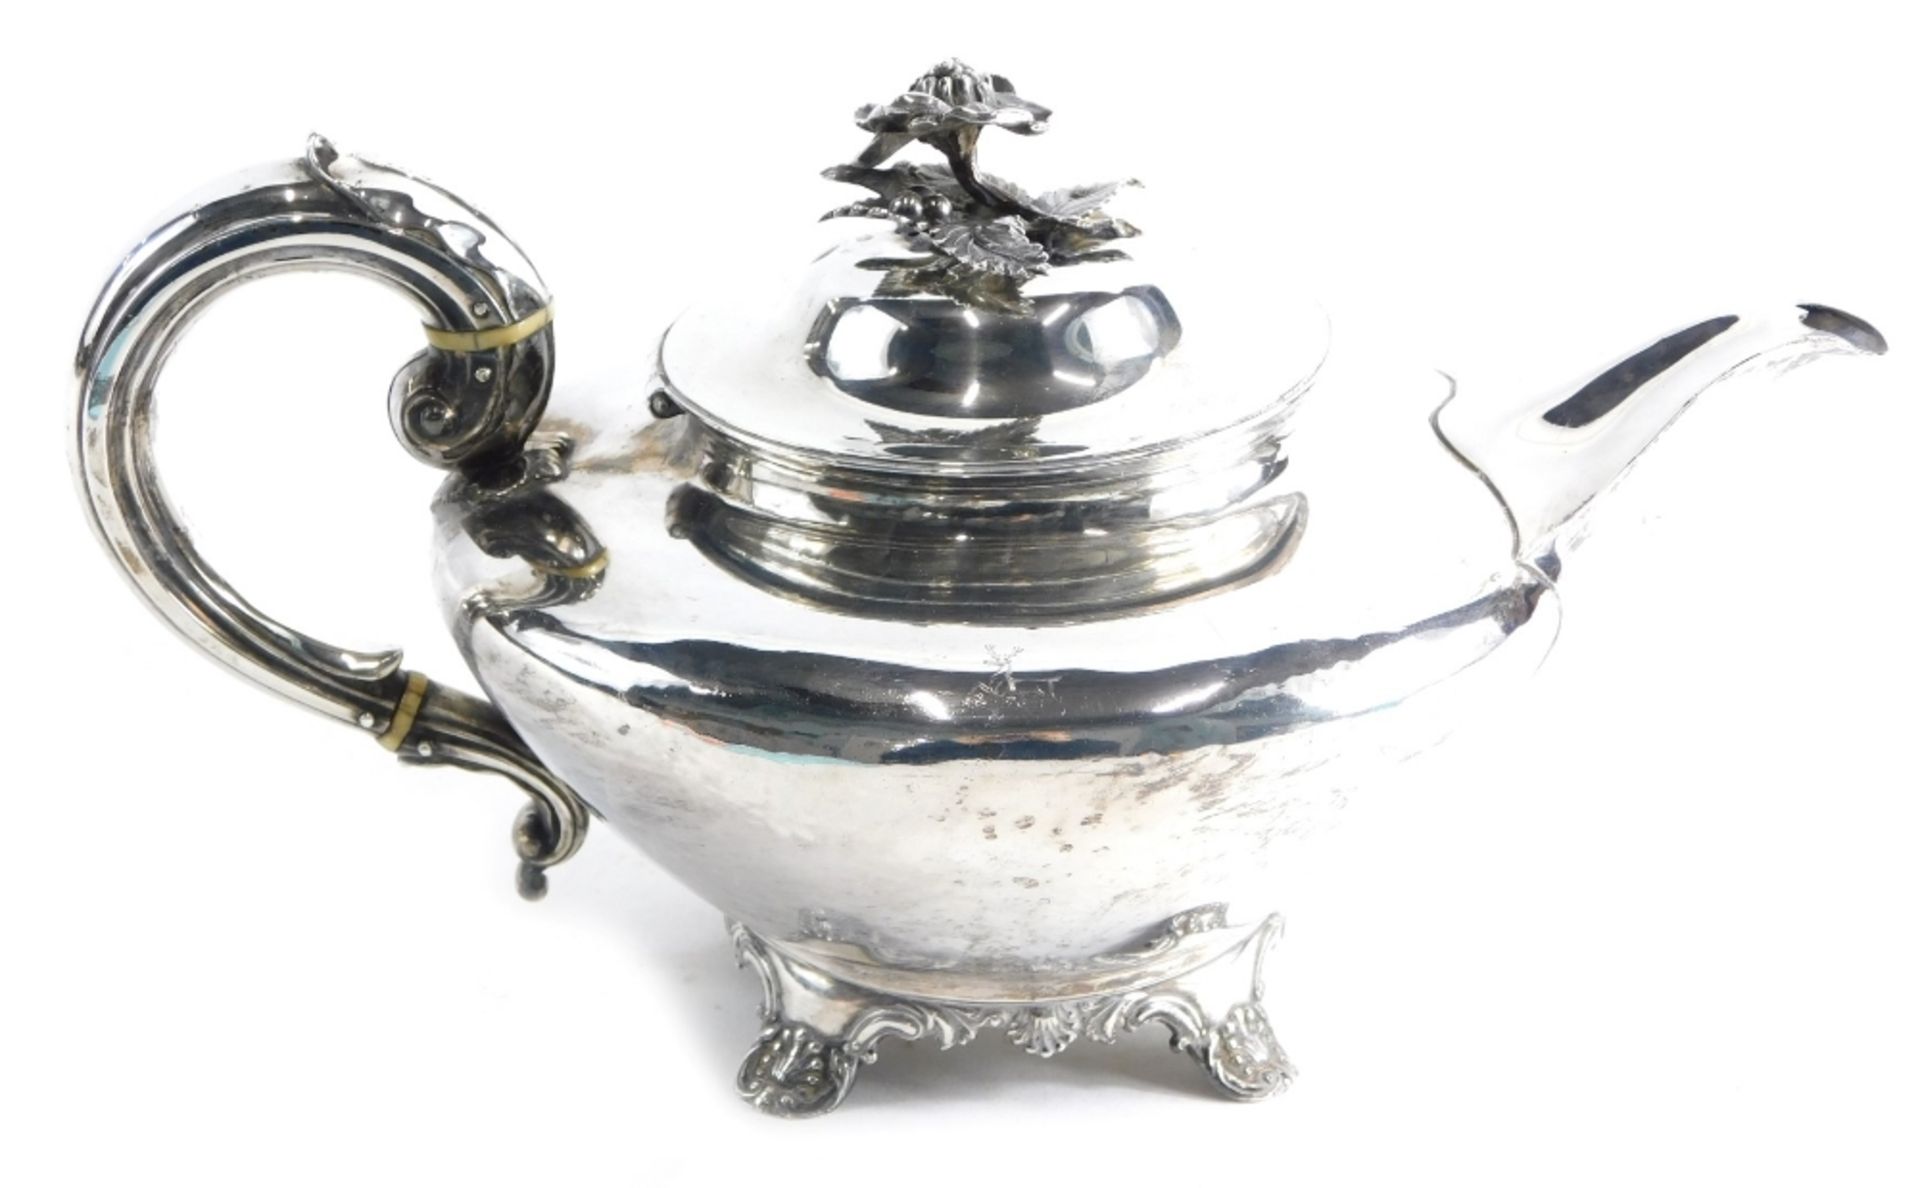 A George IV silver teapot, by Charles Fox II, with floral knop, acanthus leaf S scroll handle, circu